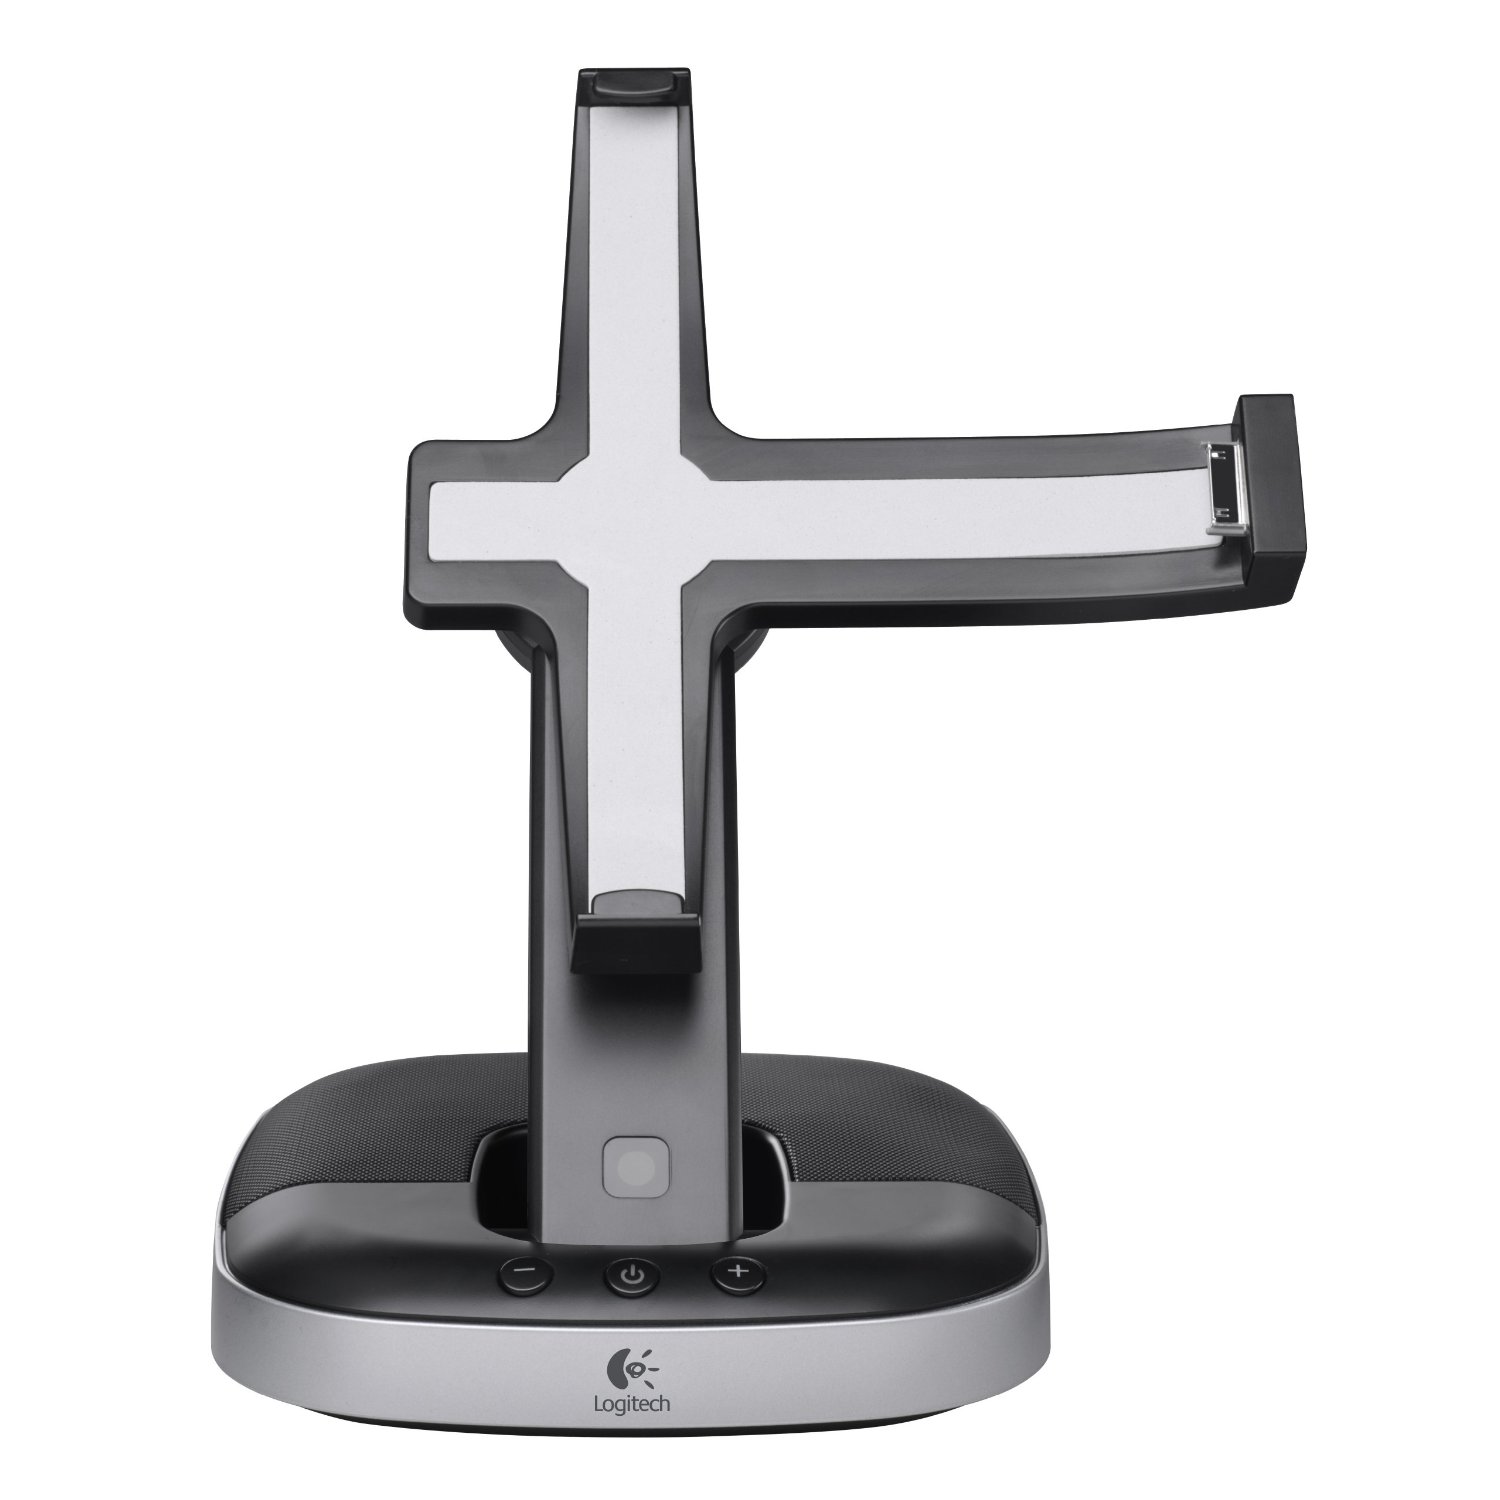 http://thetechjournal.com/wp-content/uploads/images/1203/1331142371-logitech-speaker-stand-and-charging-station-for-ipad--9.jpg